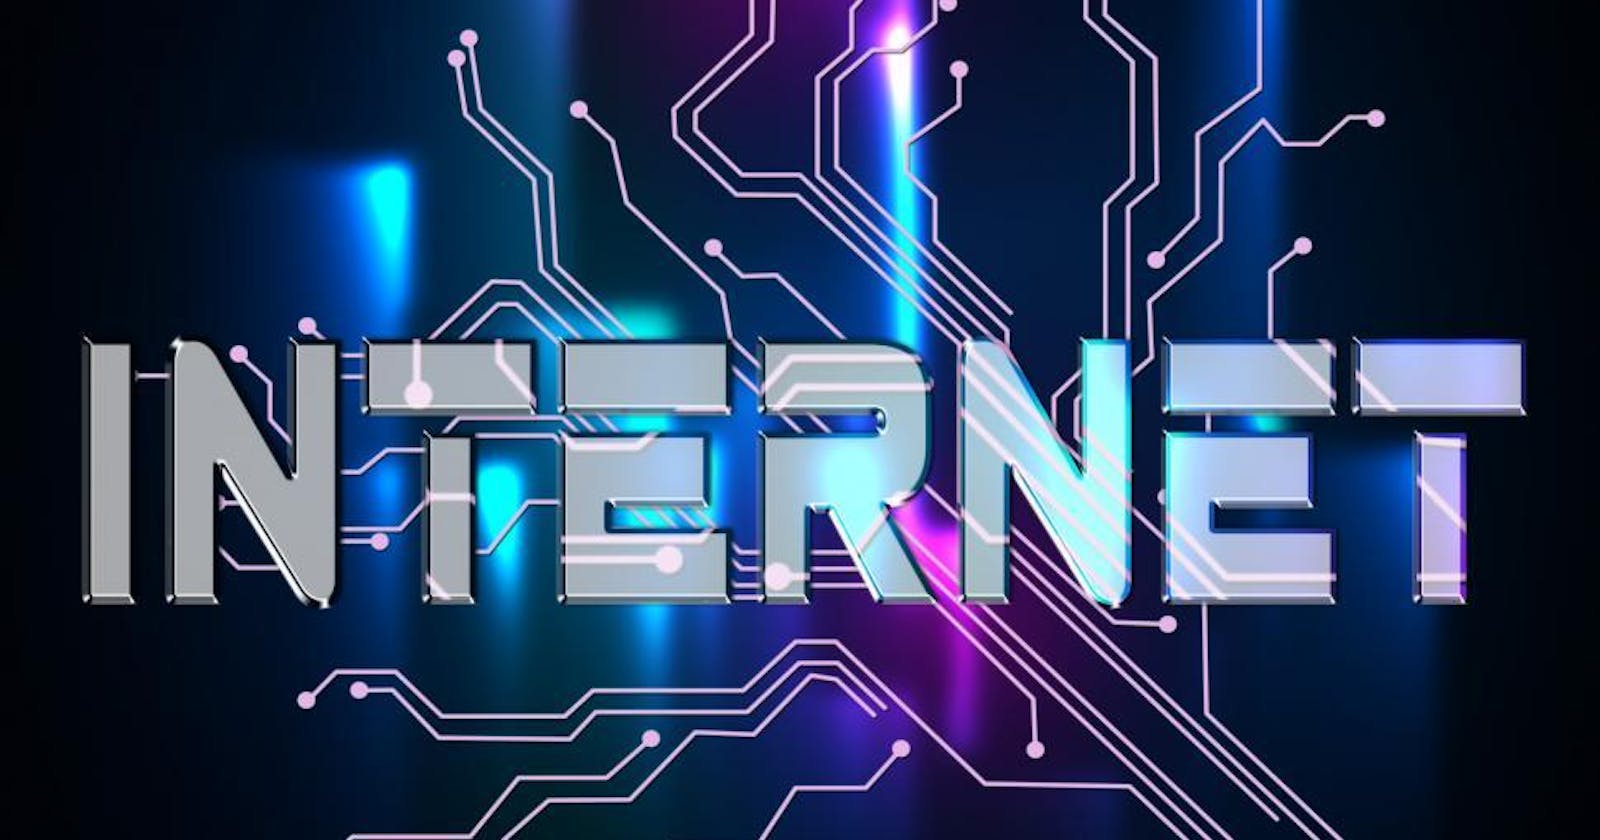 The Fascinating History of The Internet 
Perks: DNS, Network Packet, FTP, HTTP & HTTPS.